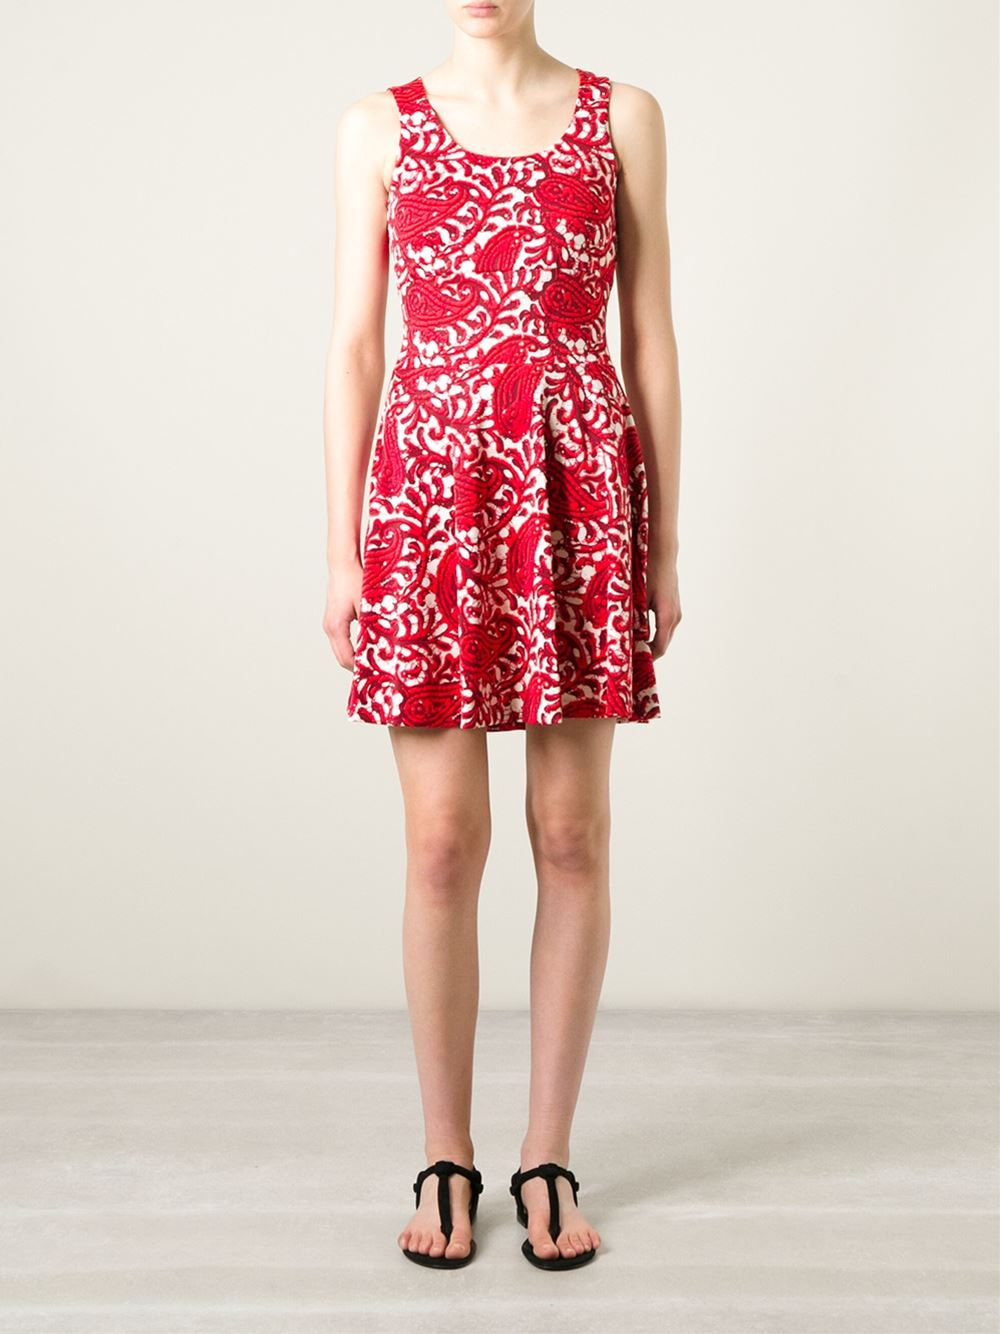 Lyst - MICHAEL Michael Kors Paisley-Print Flared Dress in Red